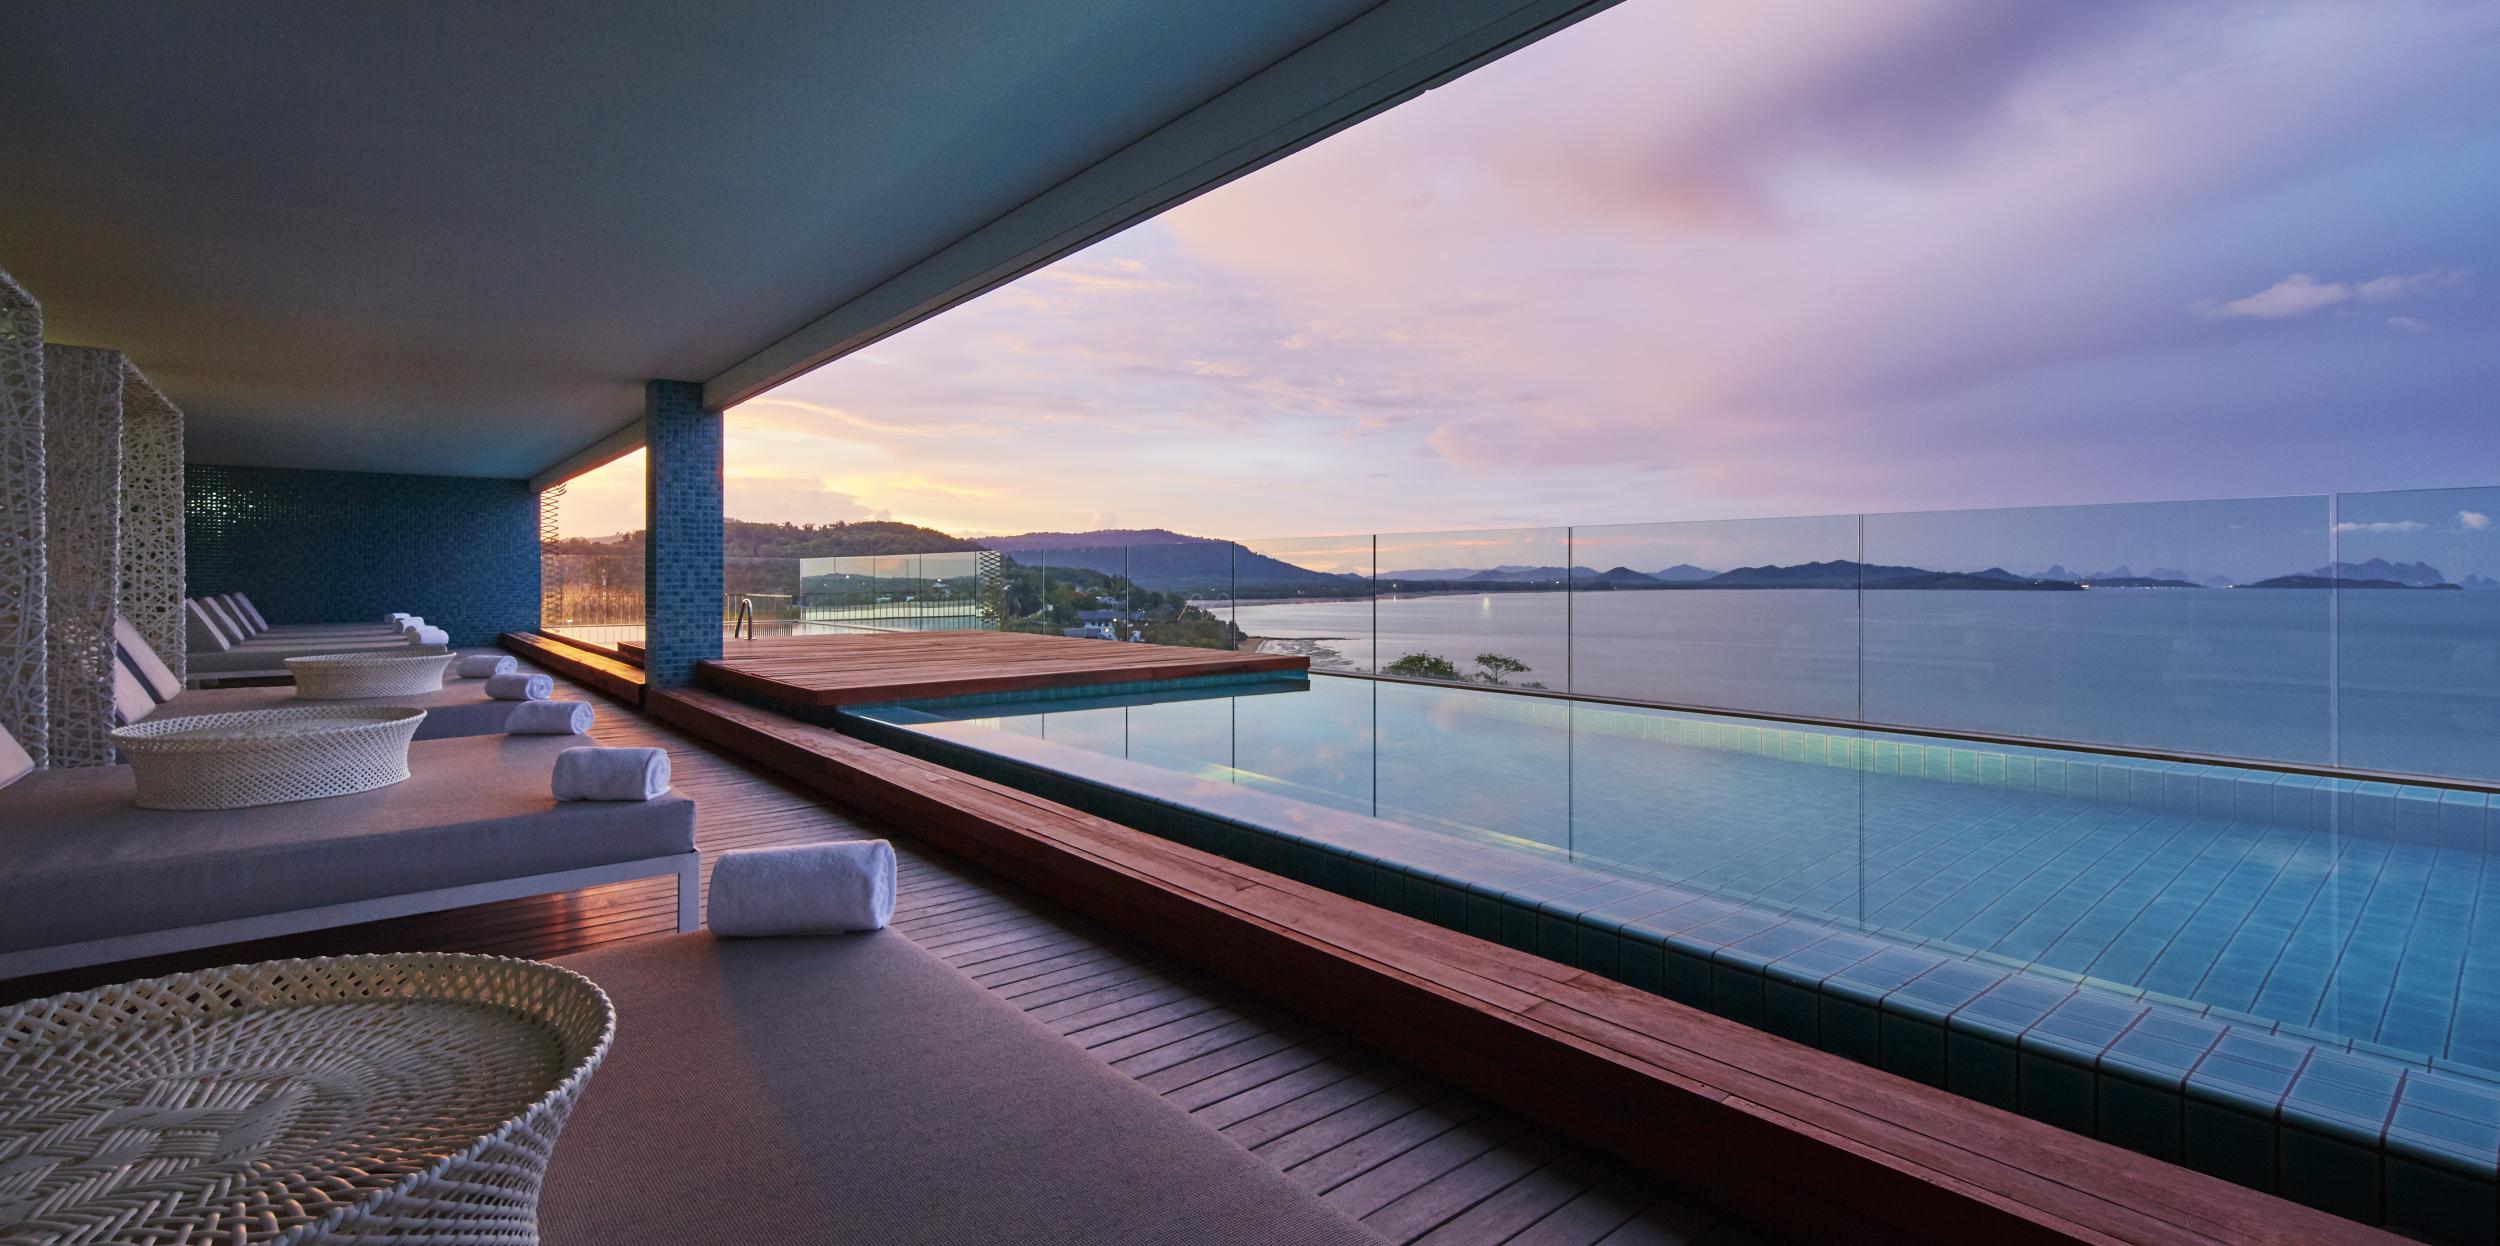 The 100 metre long infinity pool at Como Point Yamu offers incredible views across the bay